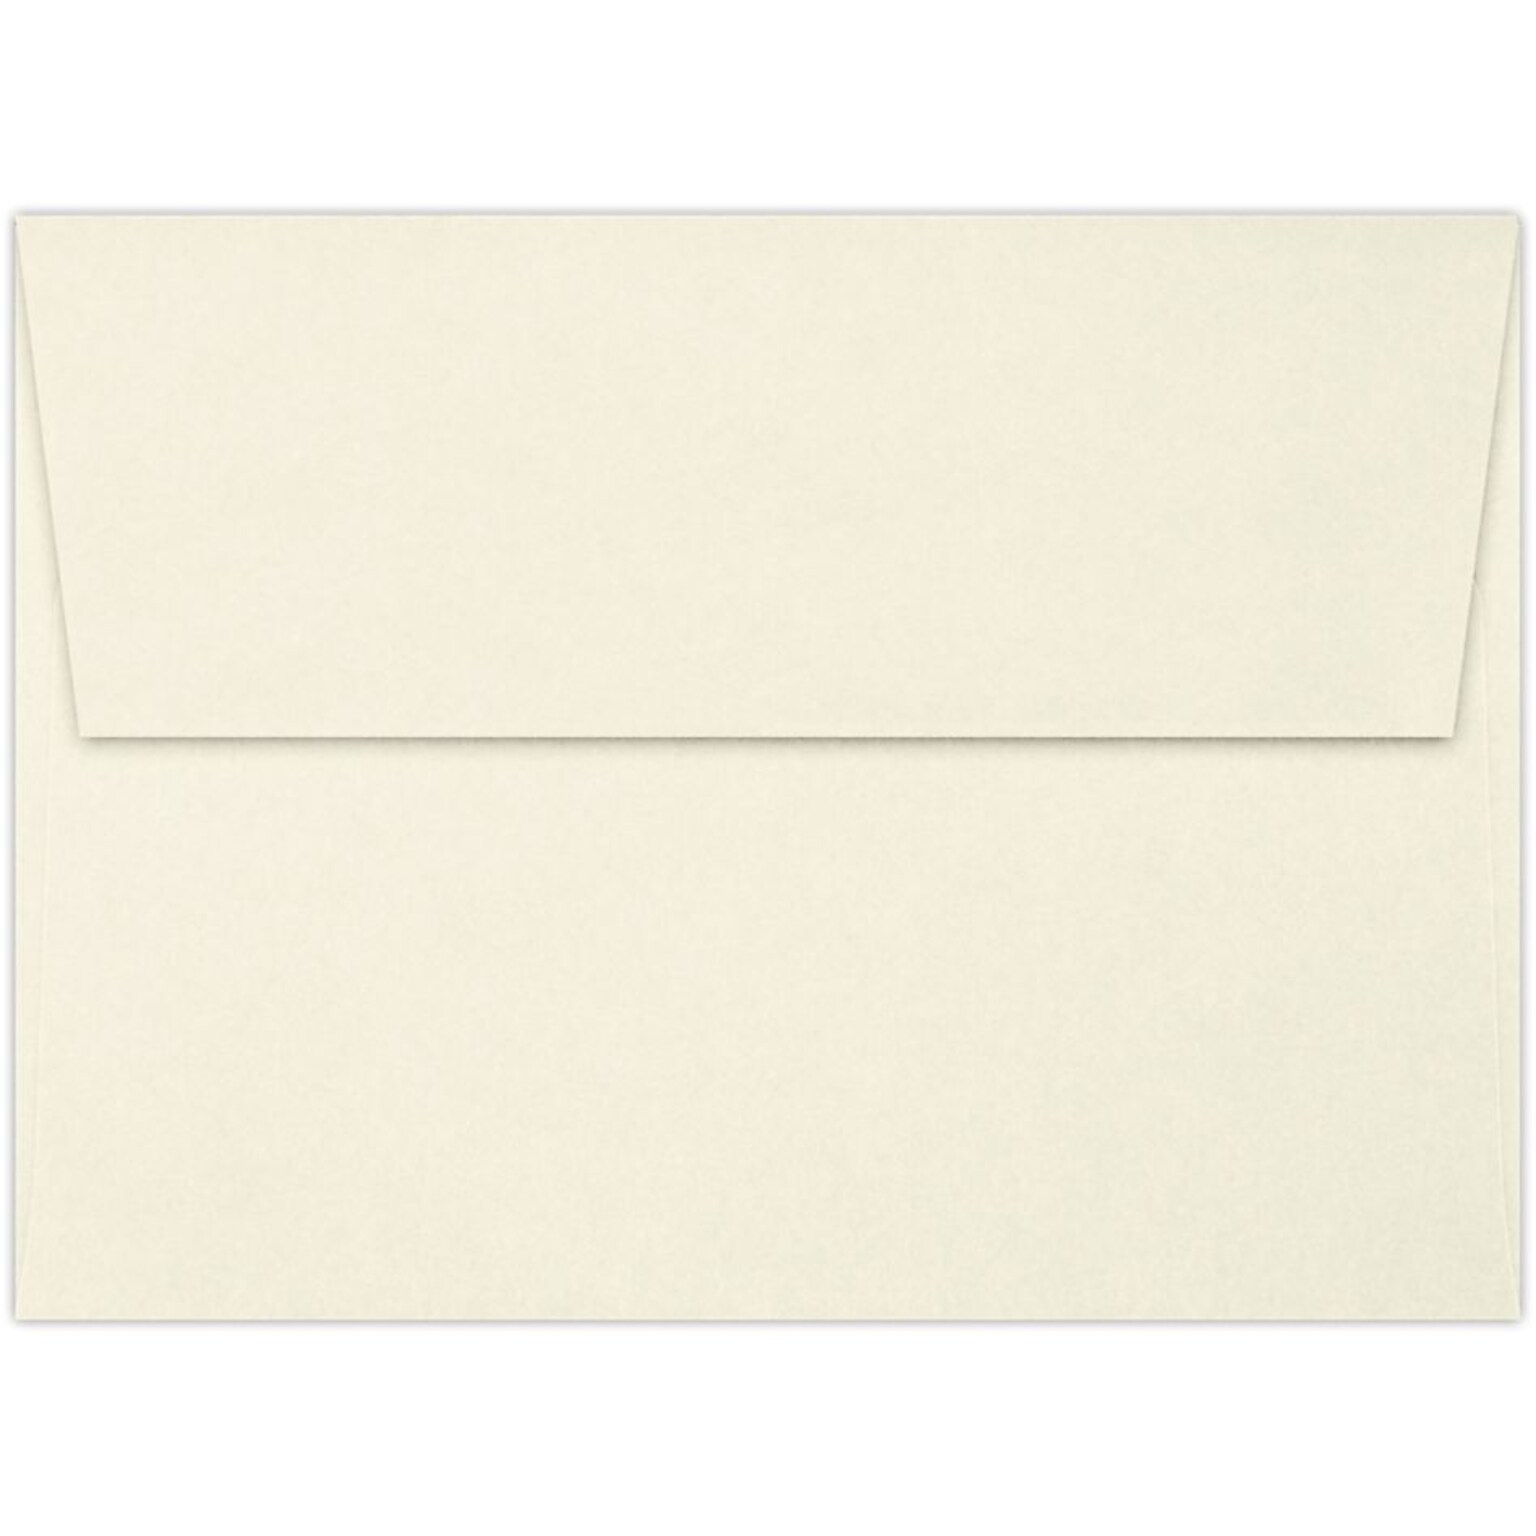 LUX A6 Invitation Envelopes (4 3/4 x 6 1/2) 50/Pack, Classic Linen® Baronial Ivory (4875-70BILI-50)